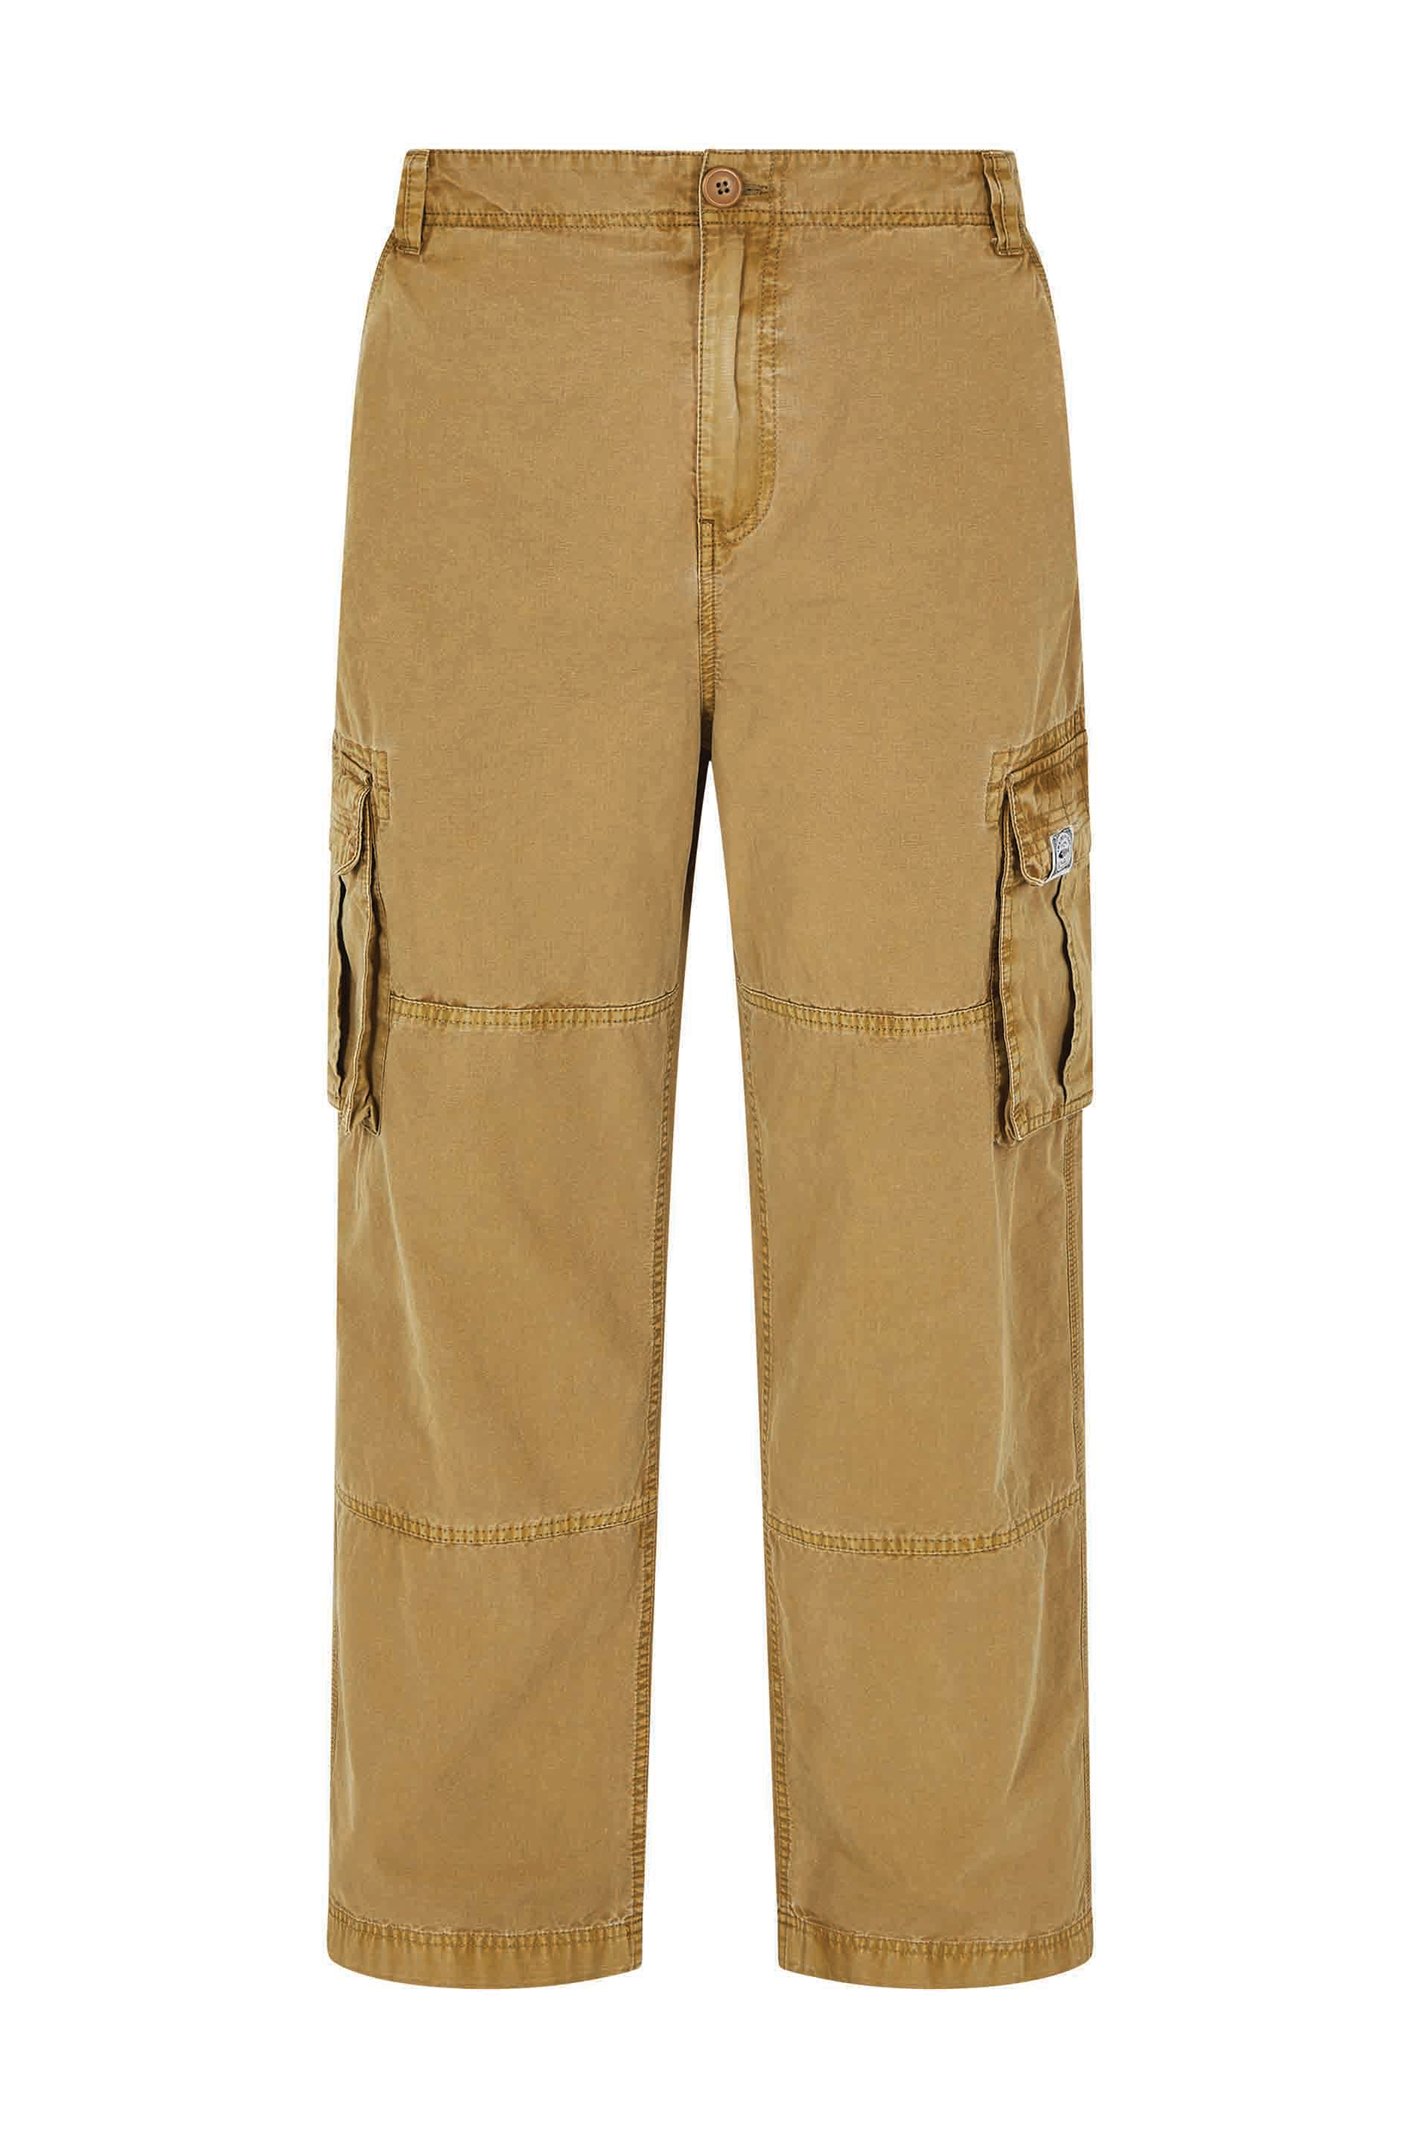 weird fish turner cargo trousers antique tan size 36